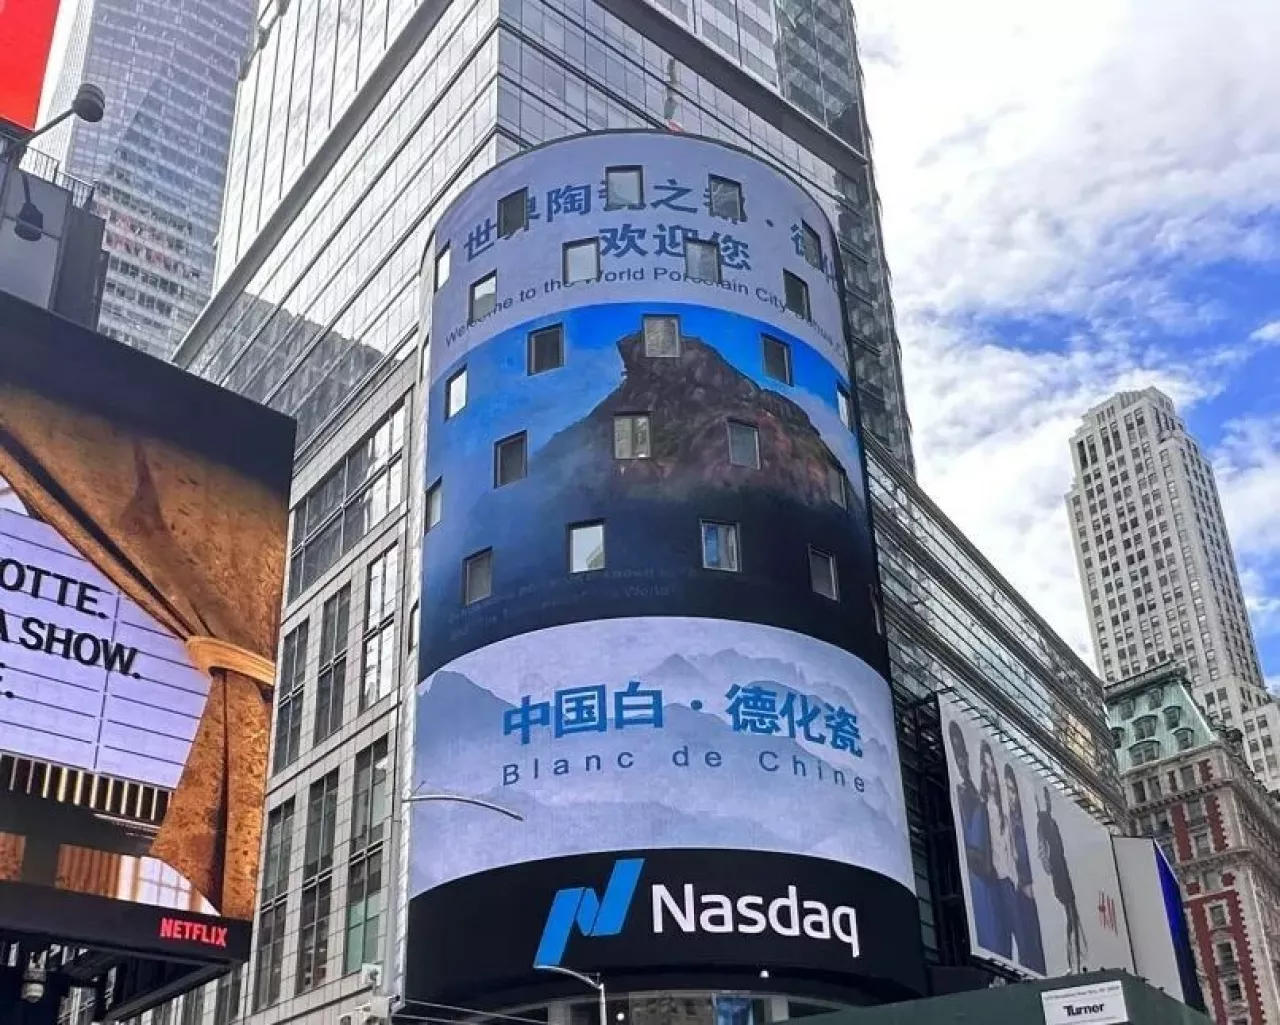 Photo shows the promotional film "Blanc de Chine" appeared on the NASDAQ screen in New York Times Square img#1